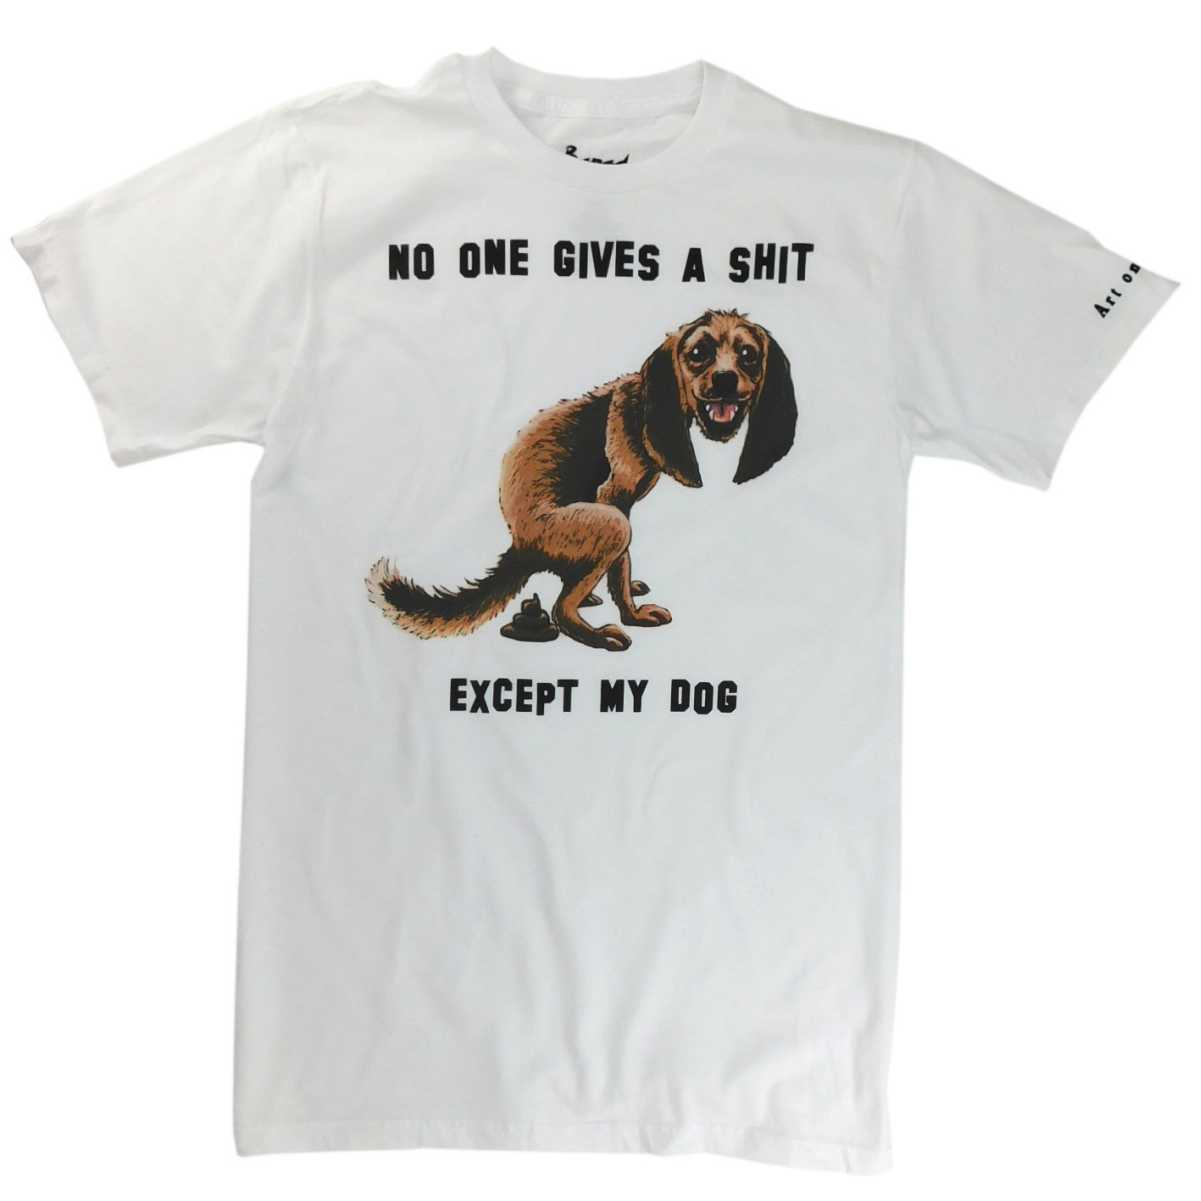 No one gives a shit, except my dog - A happy dog t-shirt